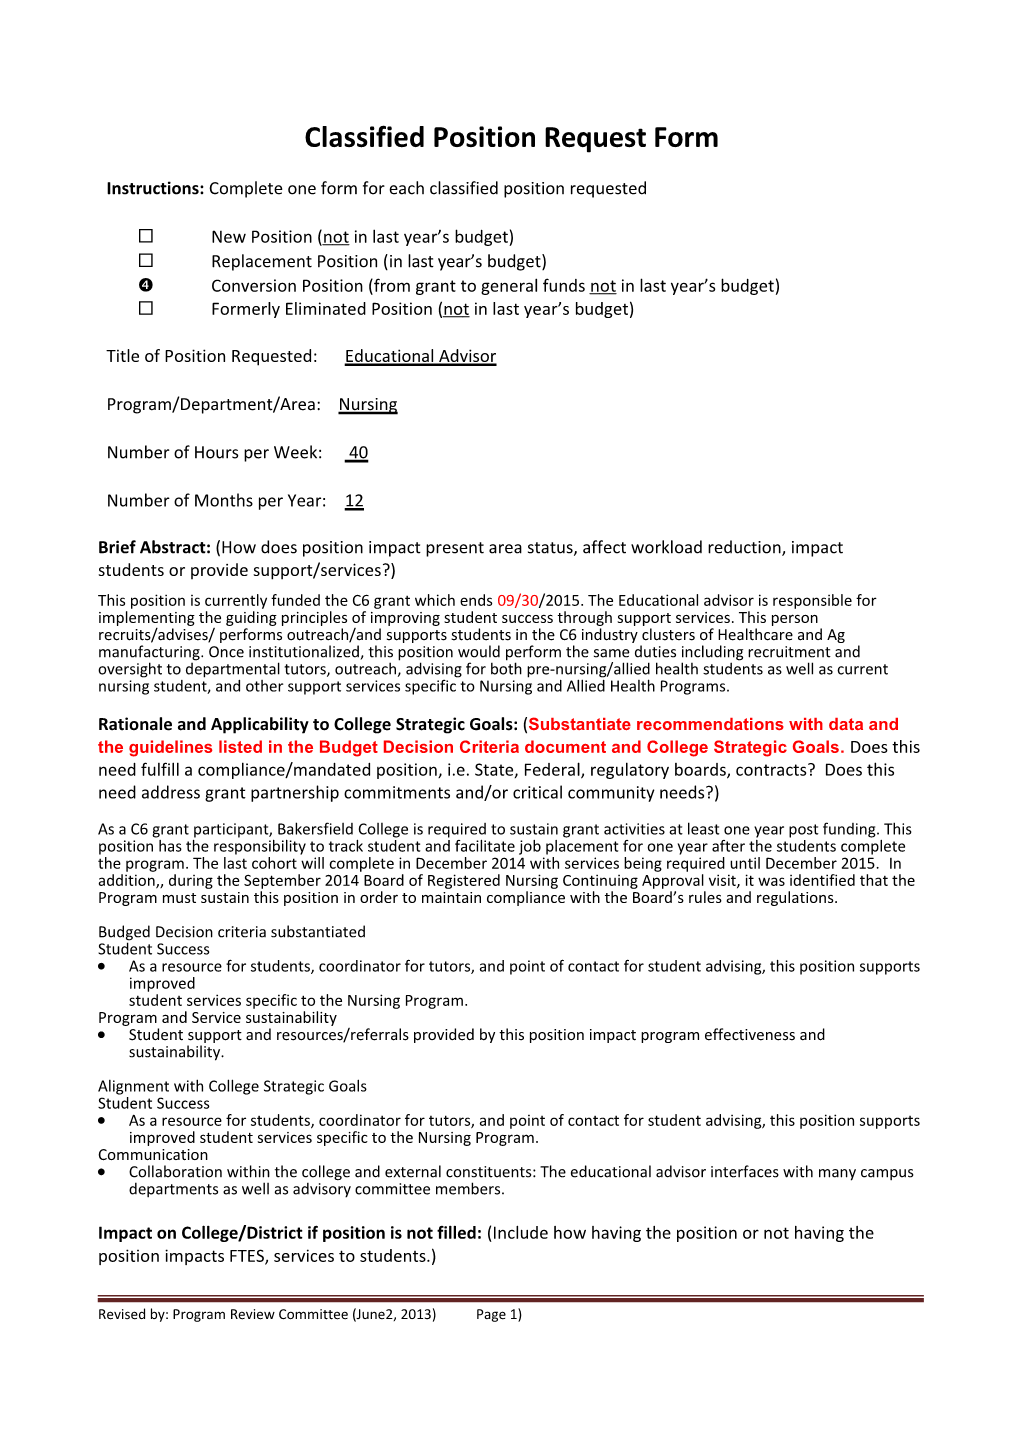 Classified Position Request Form s1